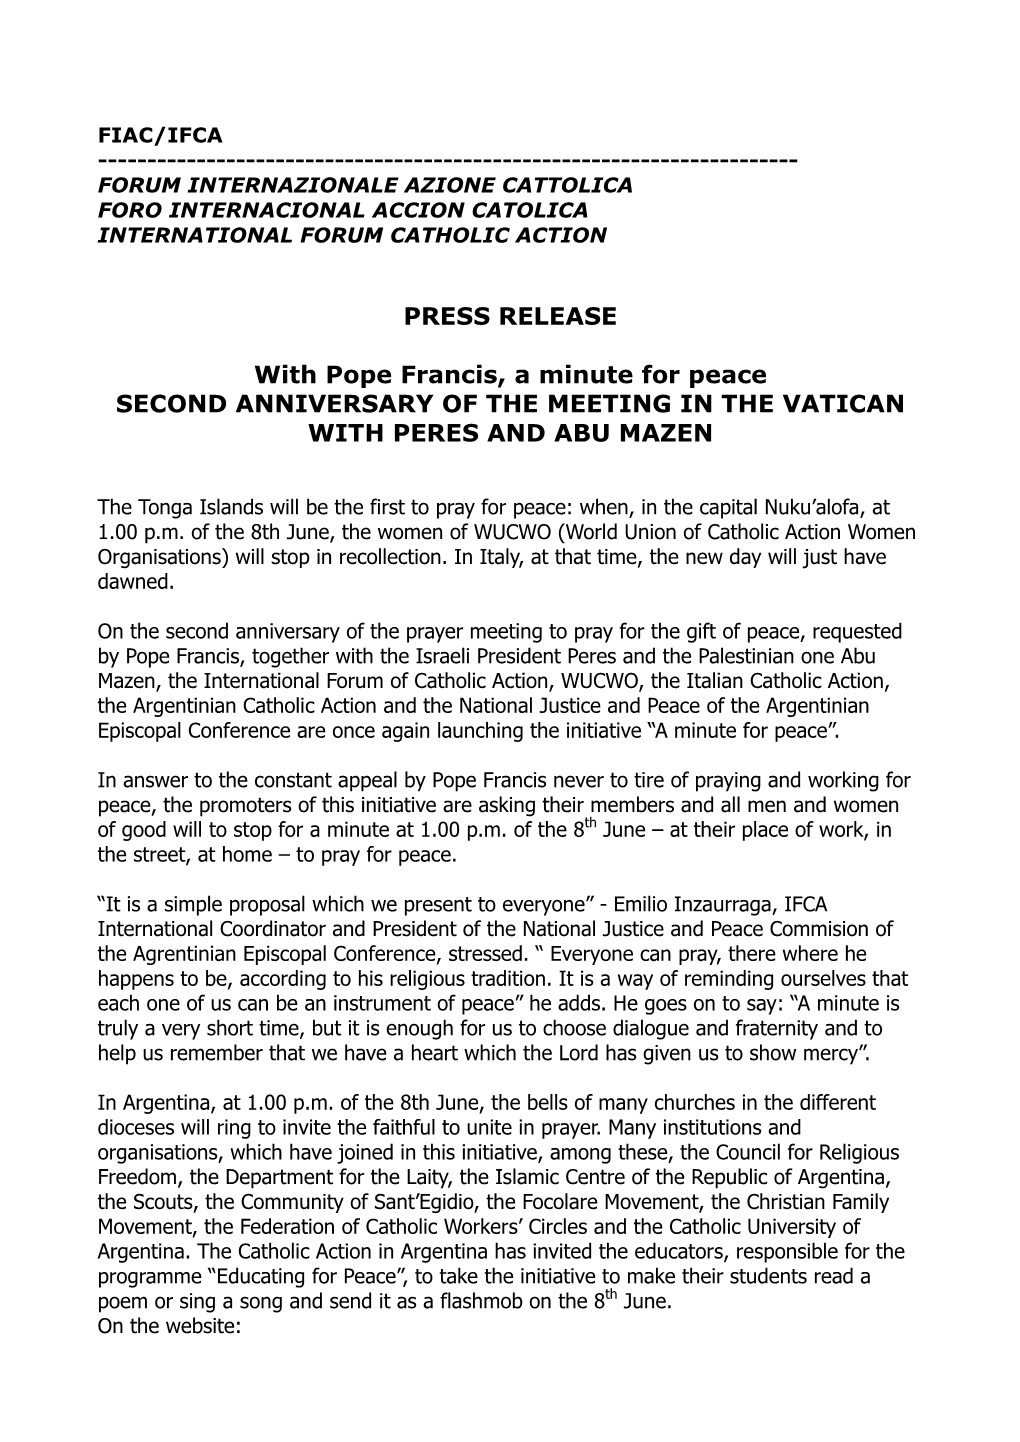 PRESS RELEASE with Pope Francis, a Minute for Peace SECOND